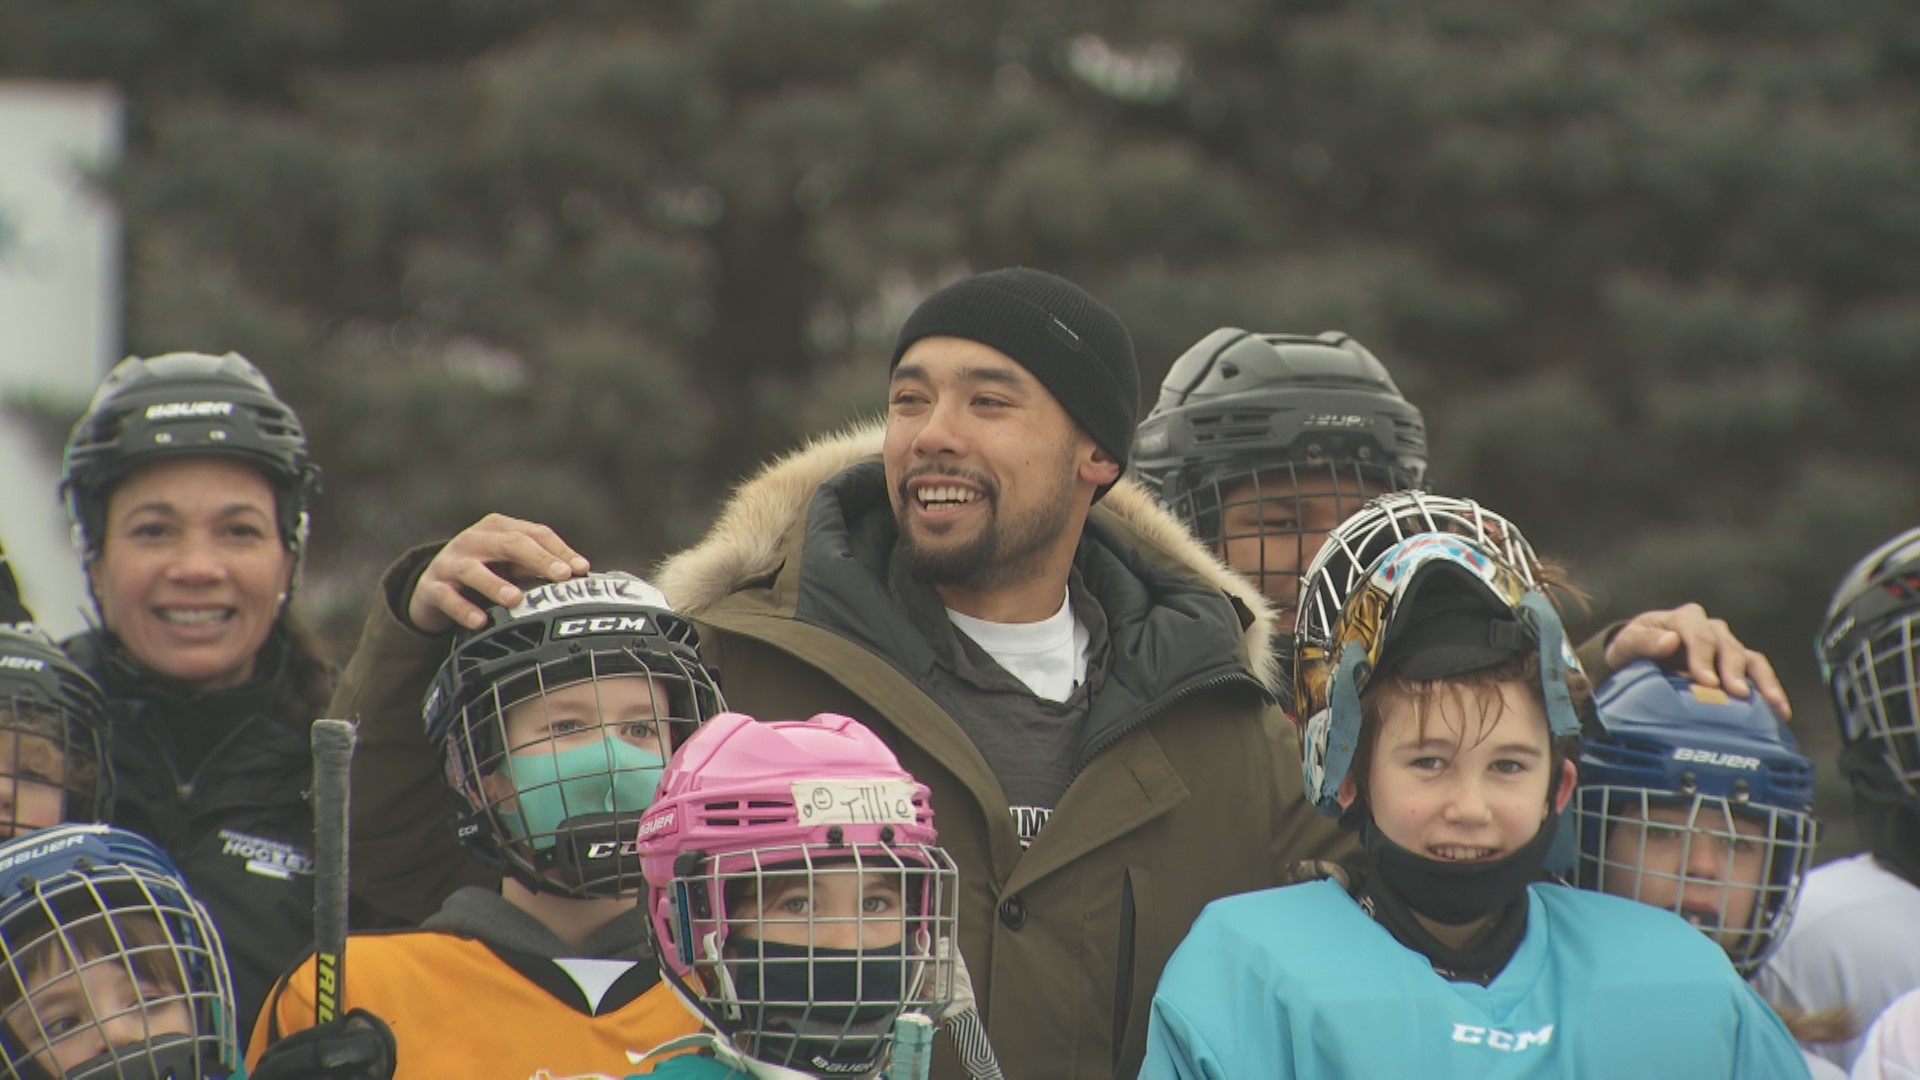 For a second year in a row, Wild defenseman Matt Dumba is helping make hockey more accessible to all.